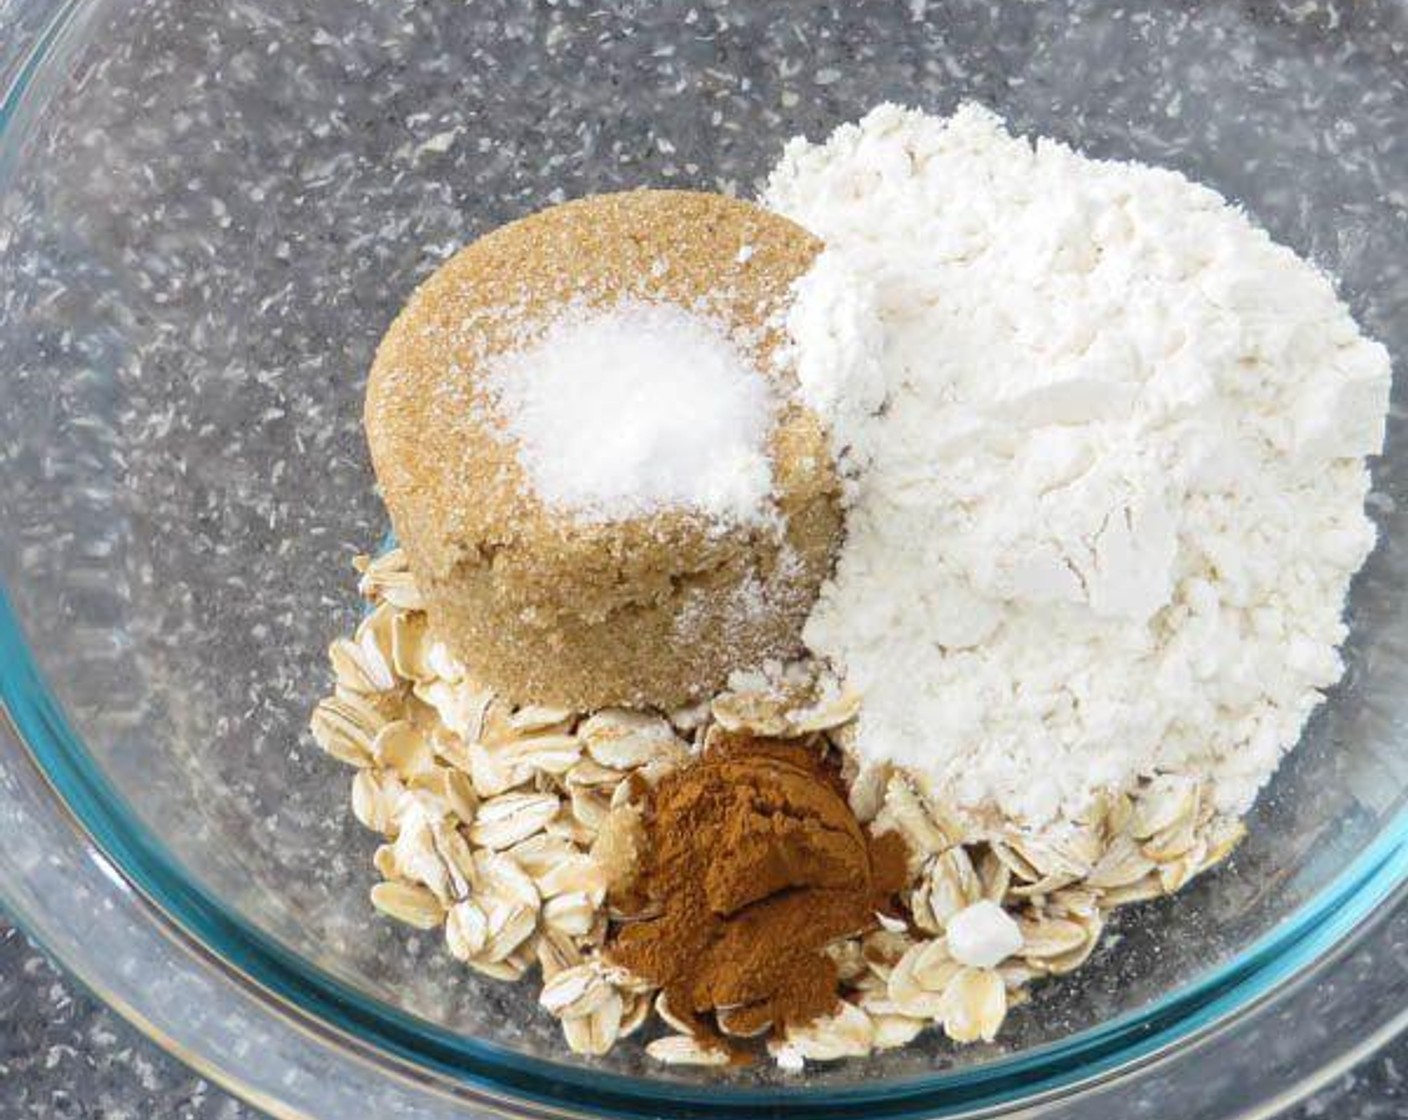 step 3 Add Brown Sugar (1/4 cup), All-Purpose Flour (1/4 cup), Oatmeal (1/4 cup), Ground Cinnamon (1/2 tsp) and Salt (1/4 tsp) to a small bowl. Toss to combine. Add butter and rub in with your fingers until well mixed. Add Sliced Almonds (1/4 cup).